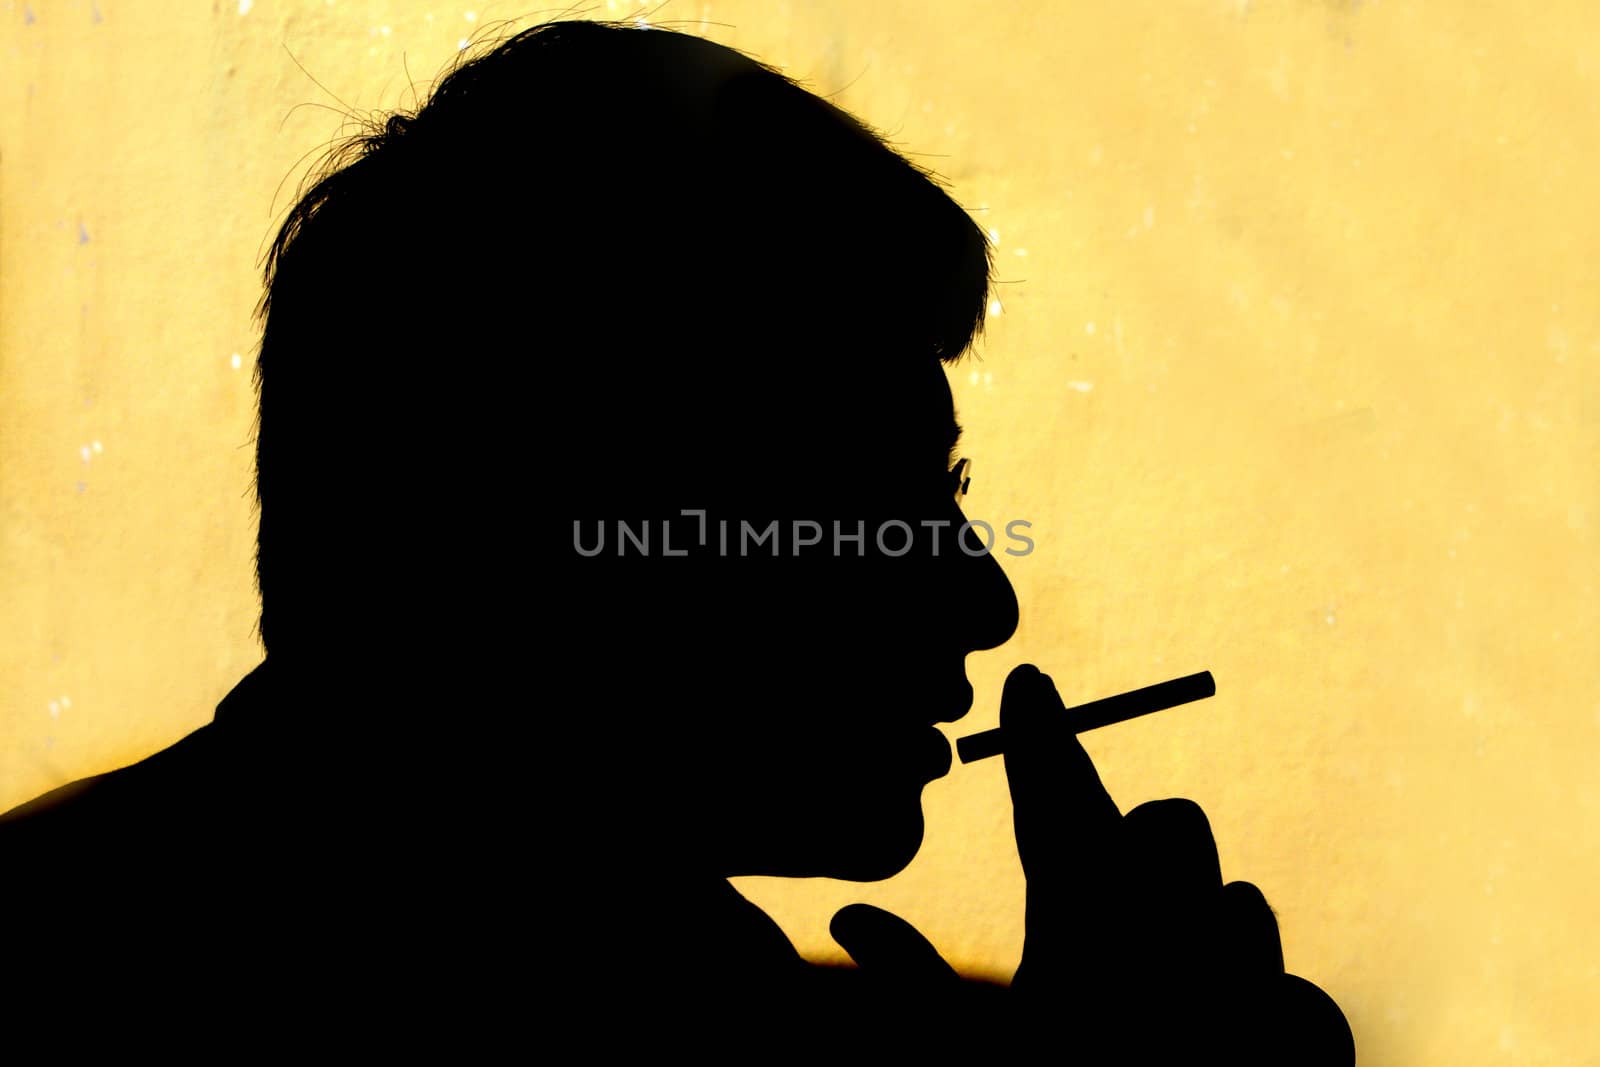 A metaphorical image of a silhouette of a guy smoking. The silhouette represents the hazard of smoking.